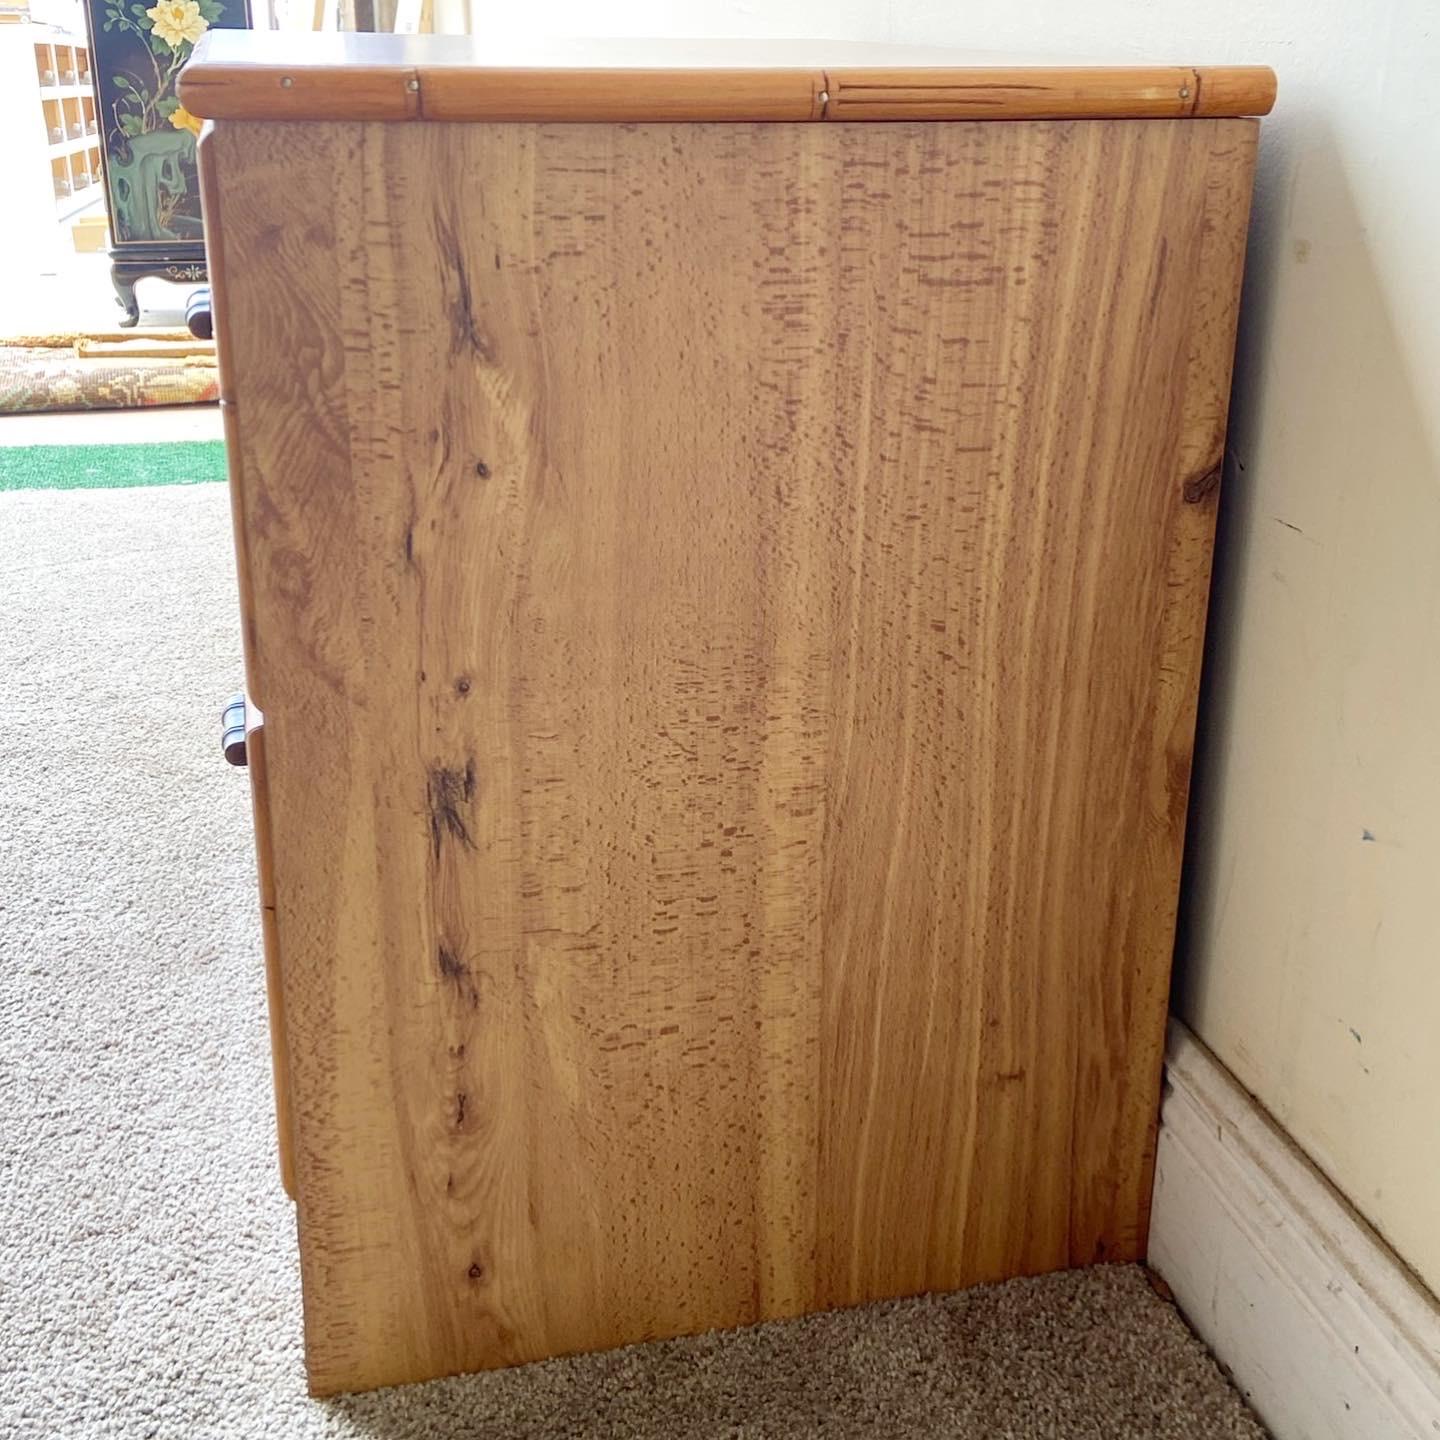 Boho Chic Wood Grain Laminate Faux Bamboo & Wicker Nightstand In Good Condition For Sale In Delray Beach, FL